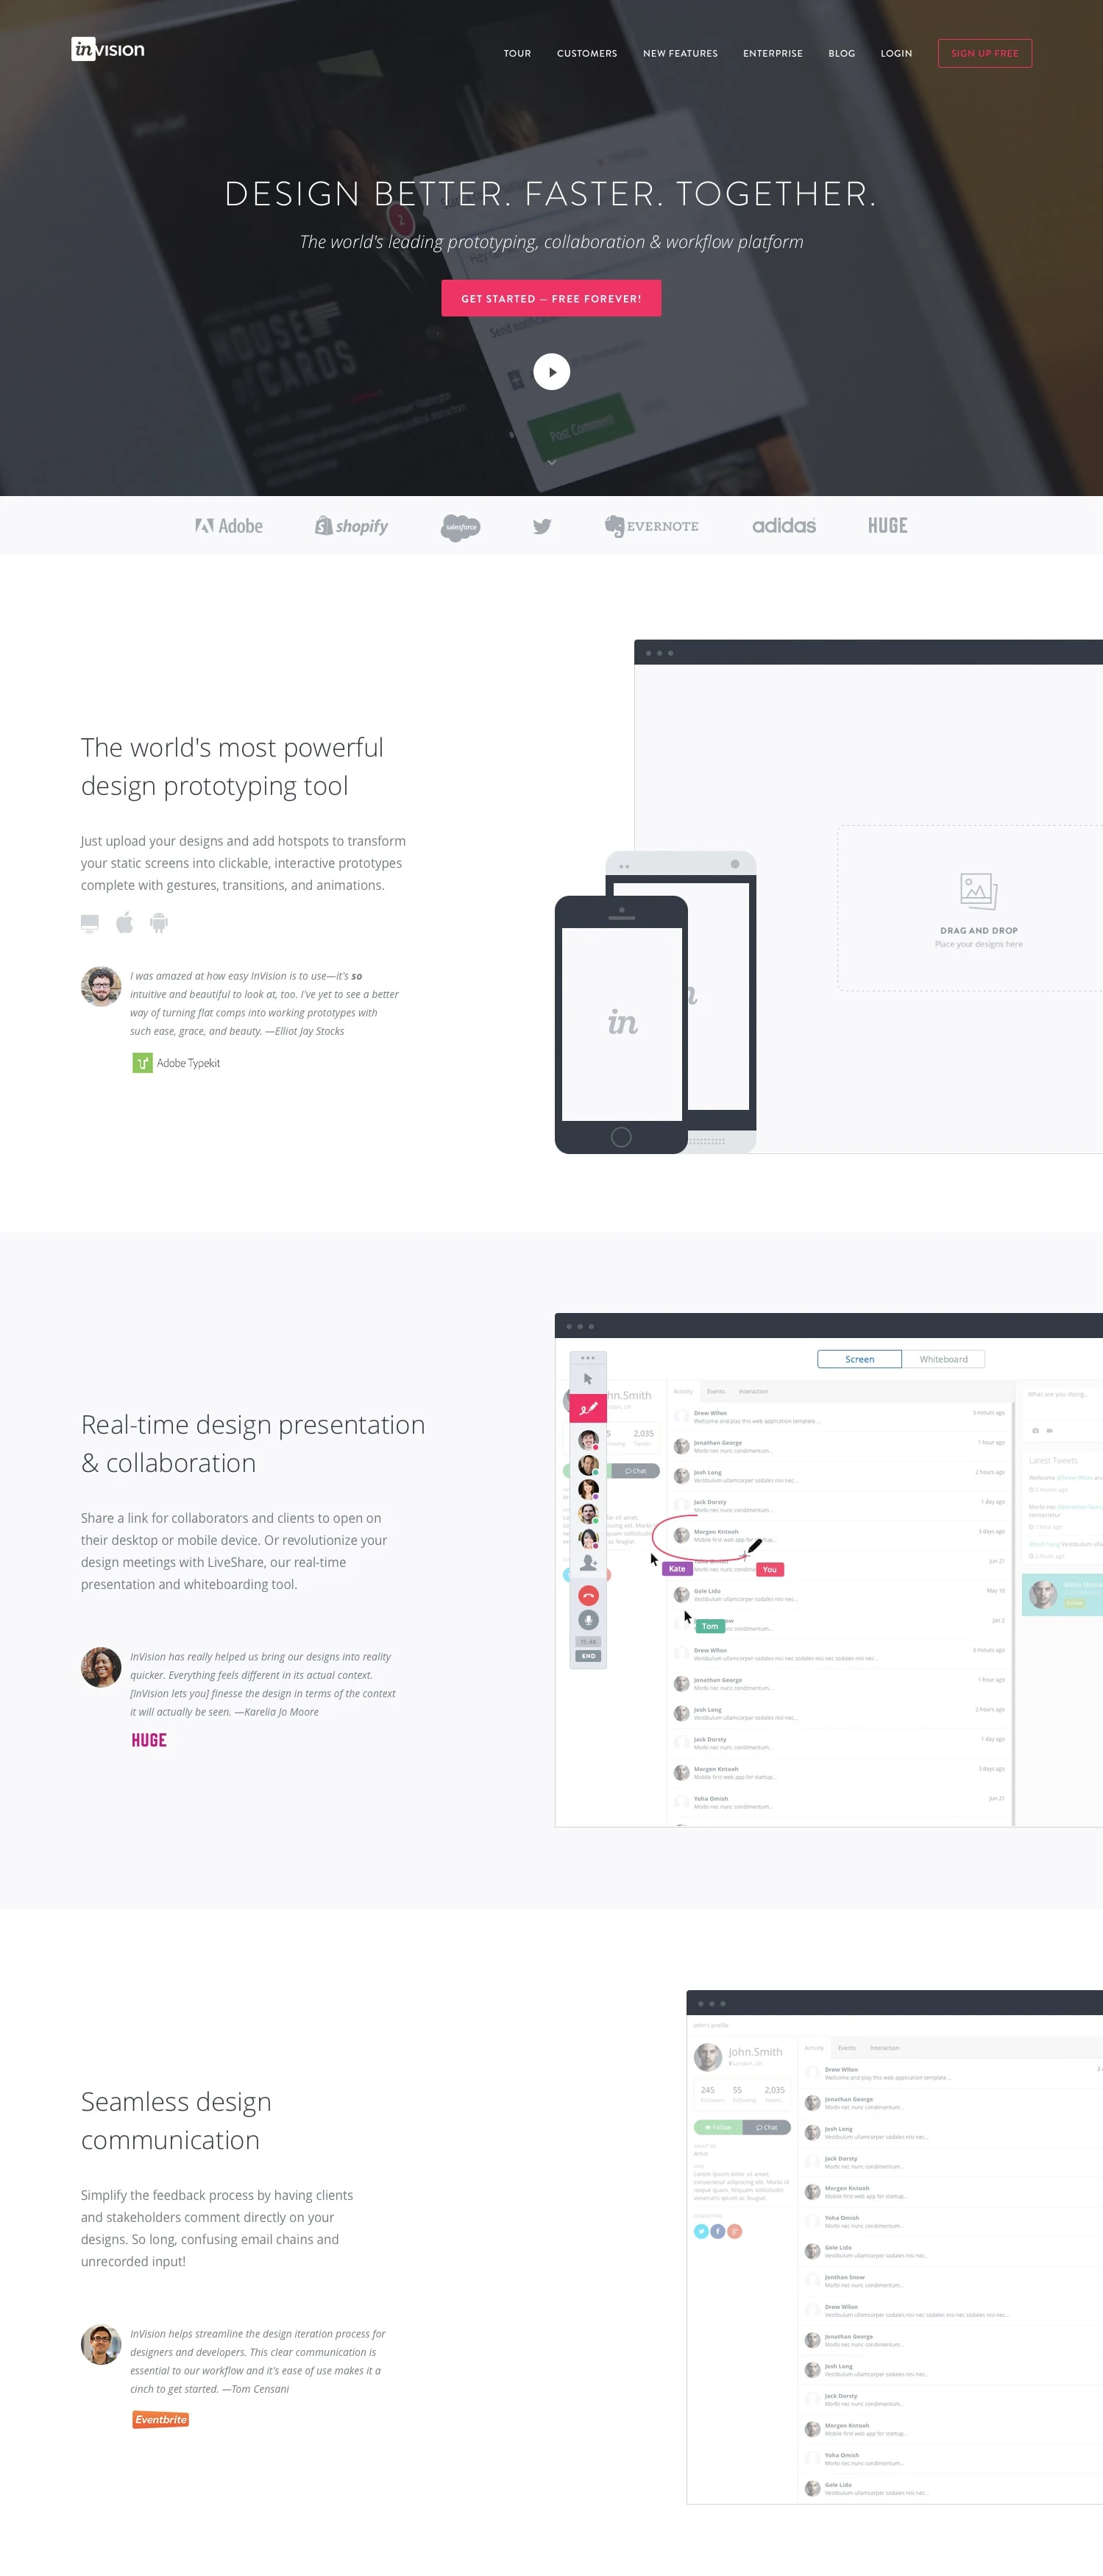 InVision Landing Page Example: Transform your Web & Mobile (iOS, Android) designs into clickable, interactive Prototypes and Mockups. Share and Collaborate on them with others. Get it FREE forever!